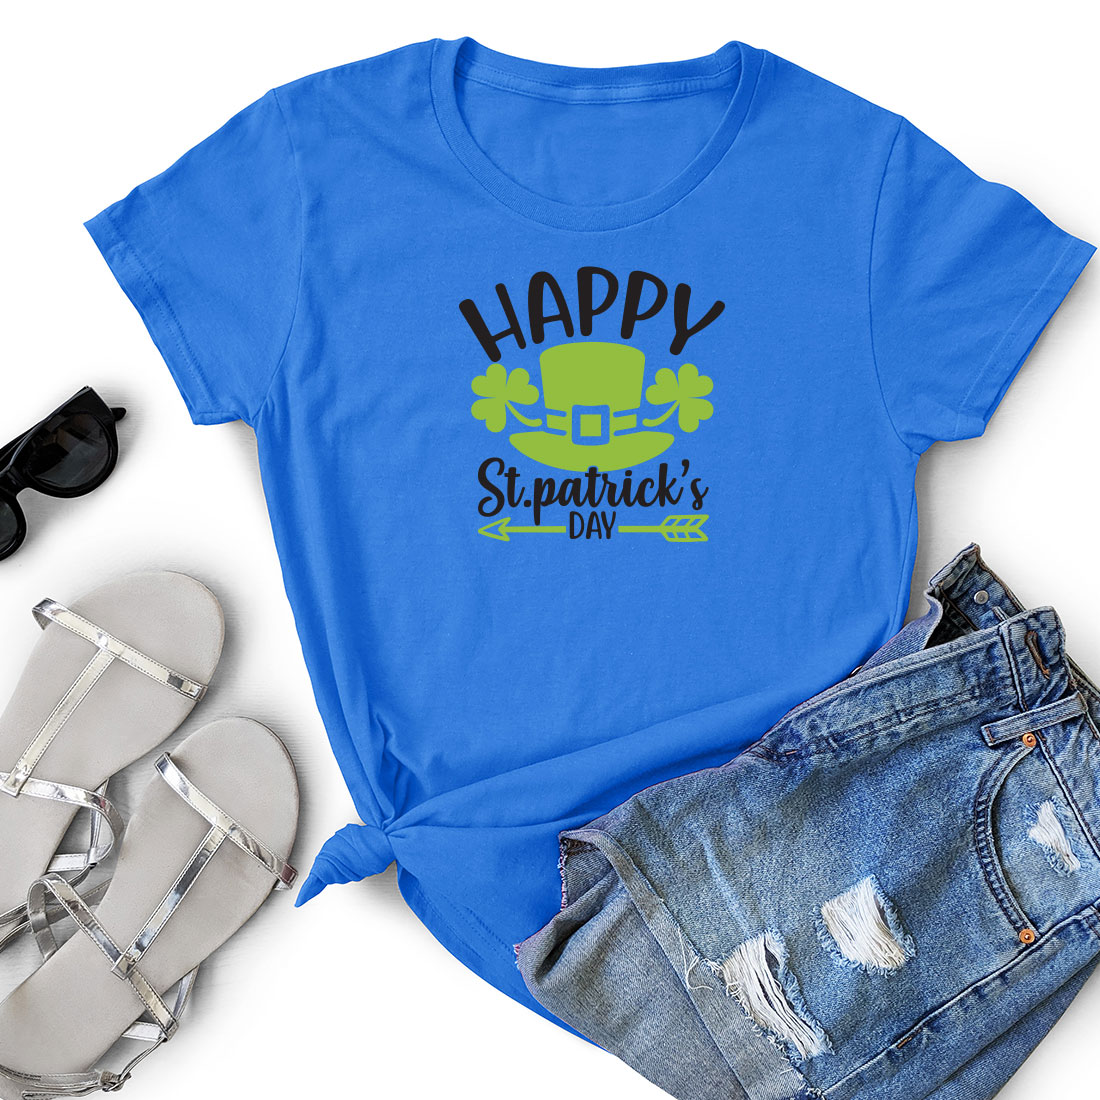 T - shirt that says happy st patrick's day next to a pair.